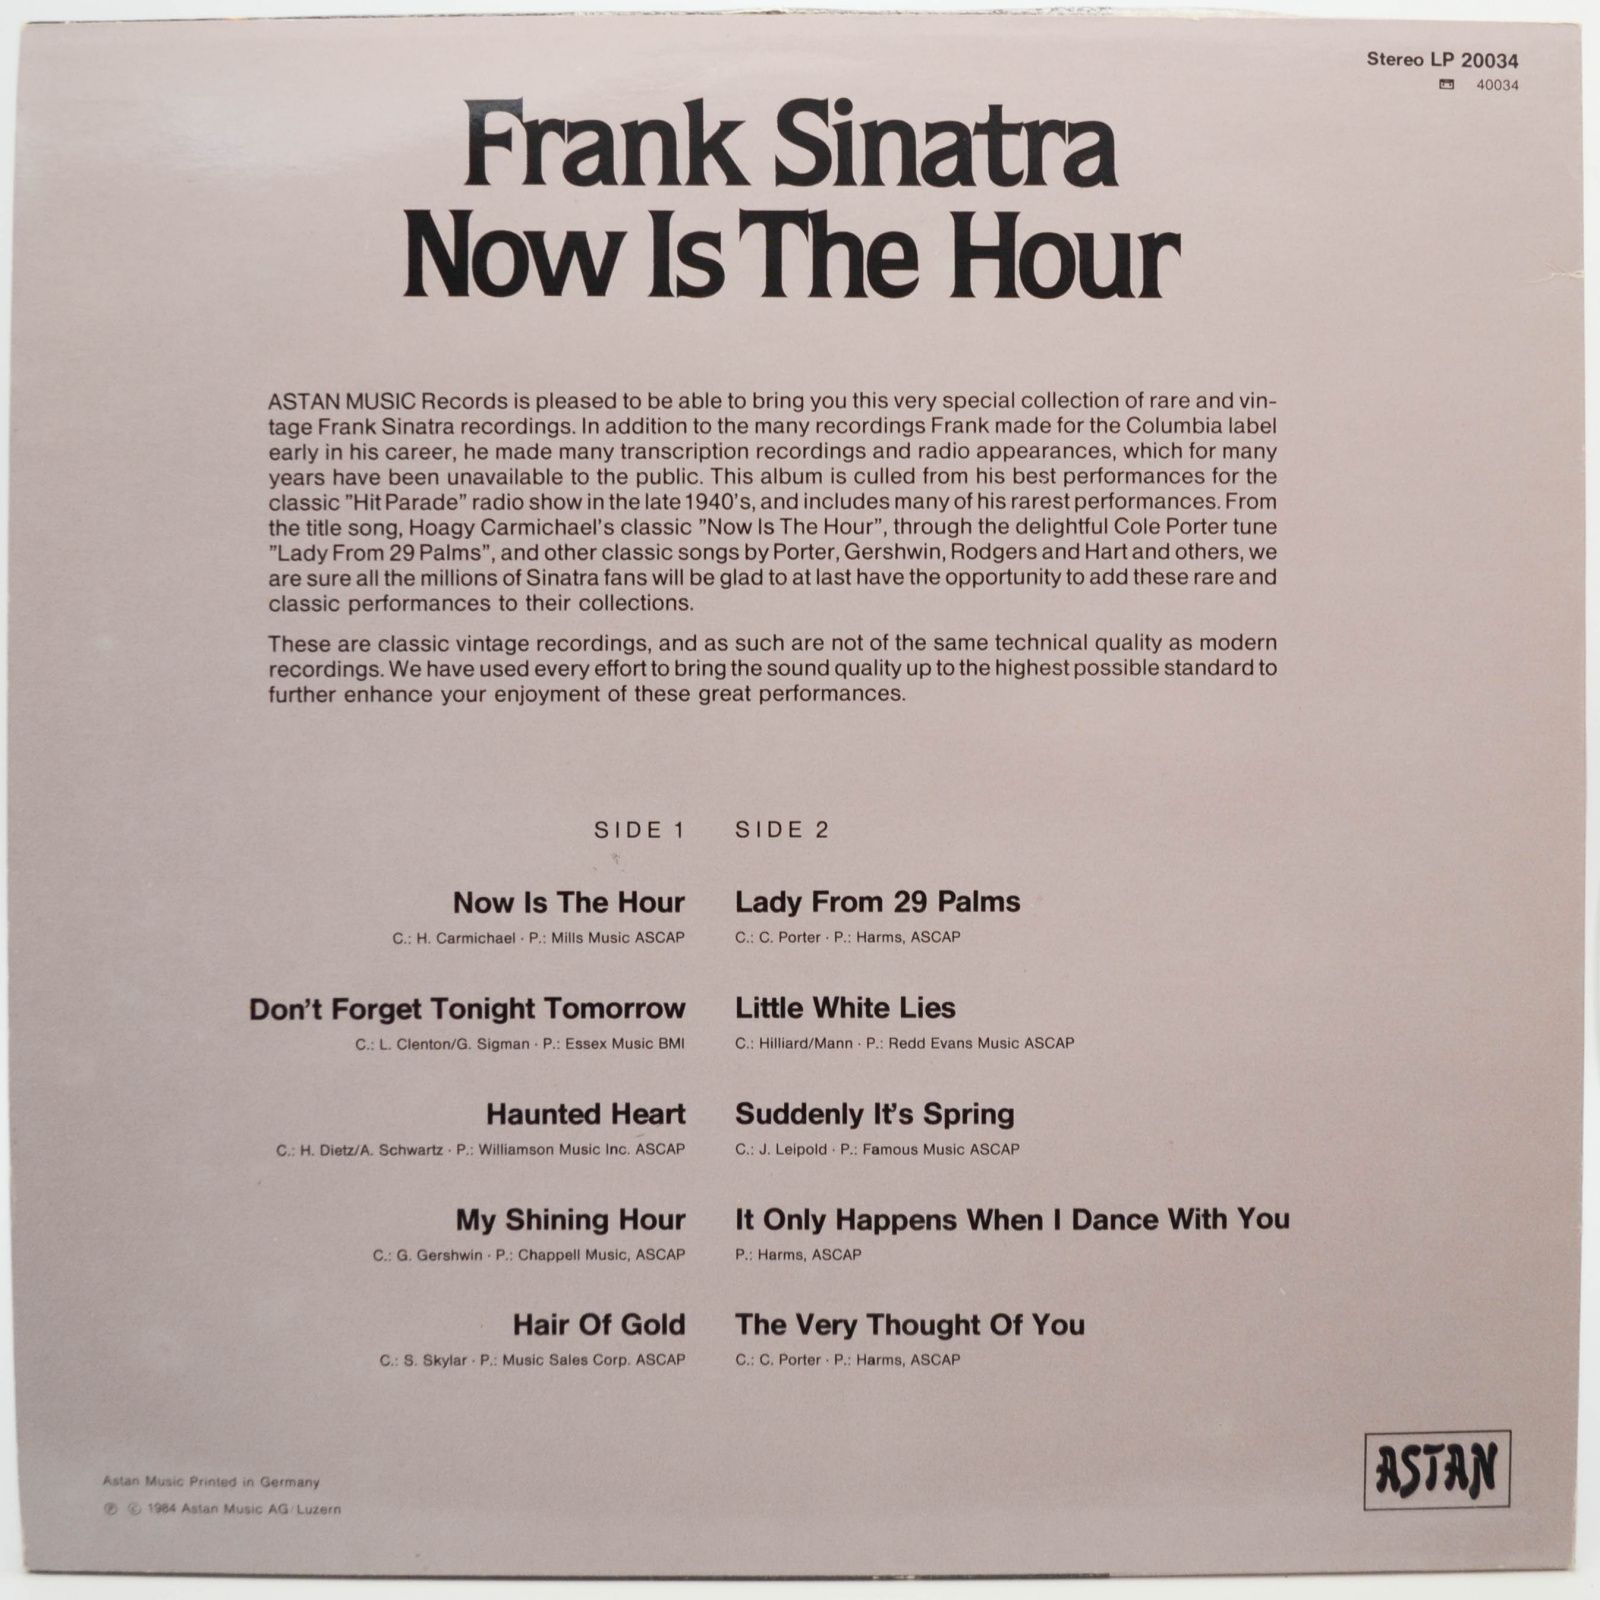 Frank Sinatra — Now Is The Hour, 1984